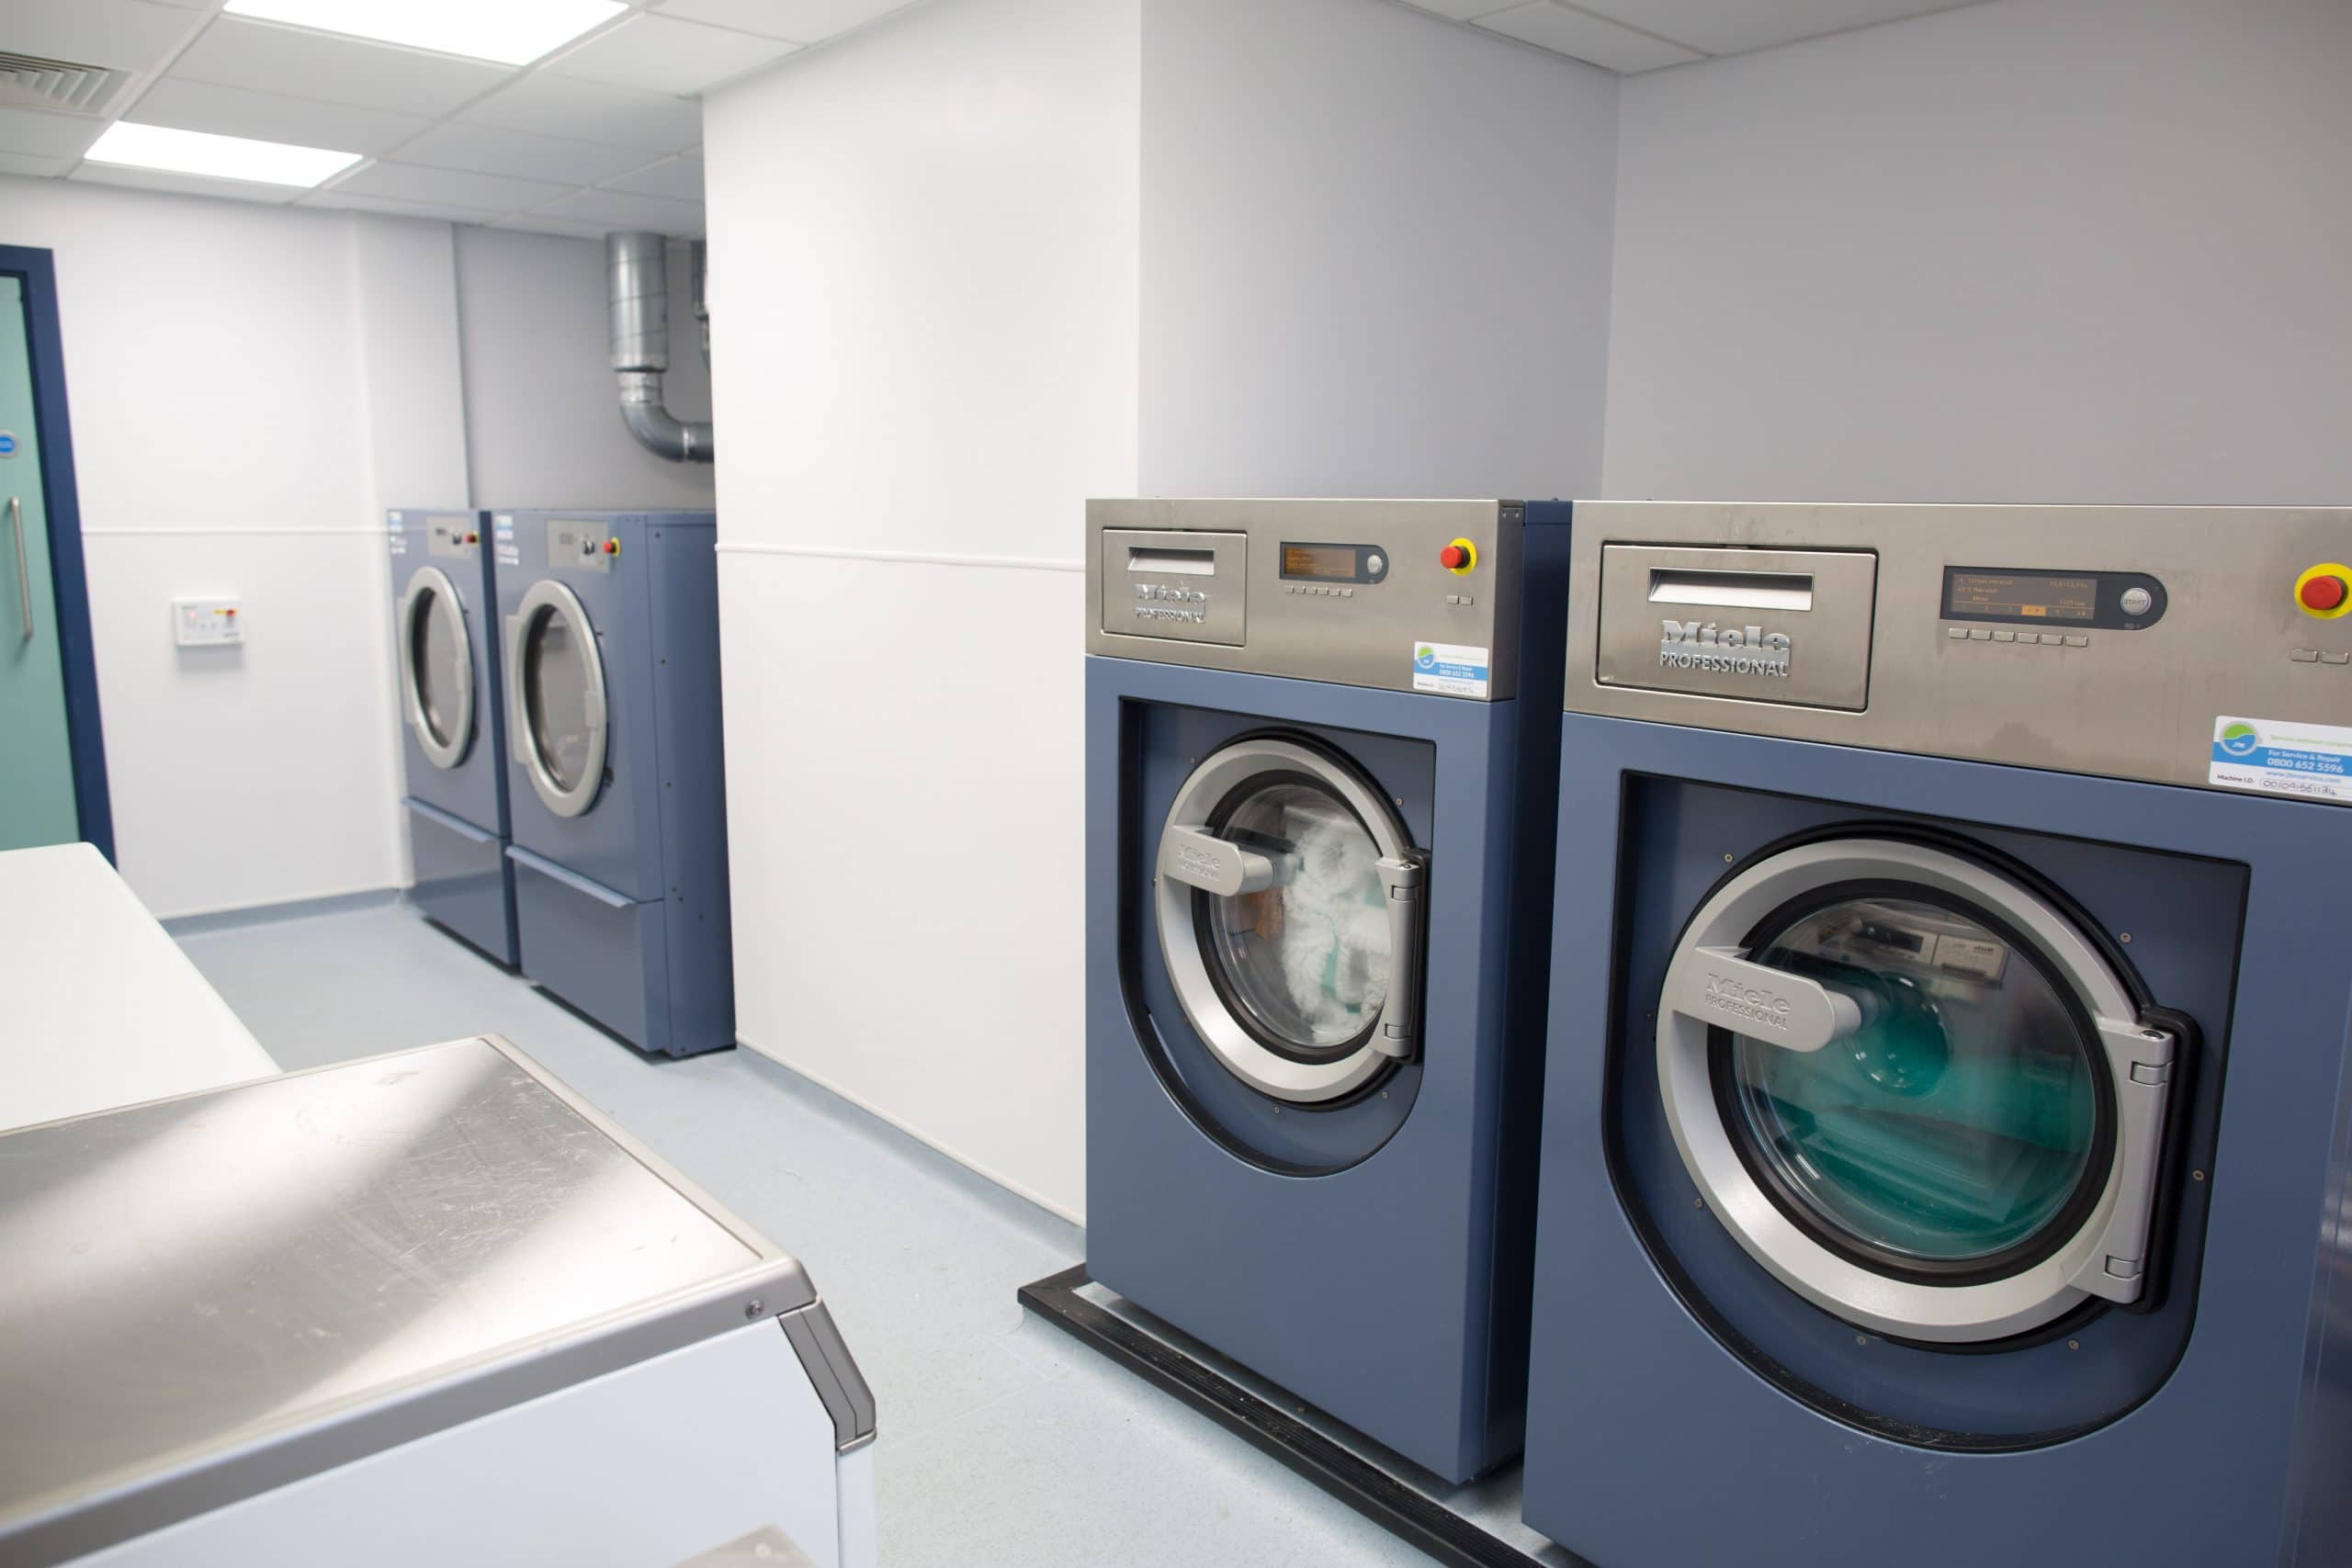 JTM Leeds based commercial laundry rentals and servicing